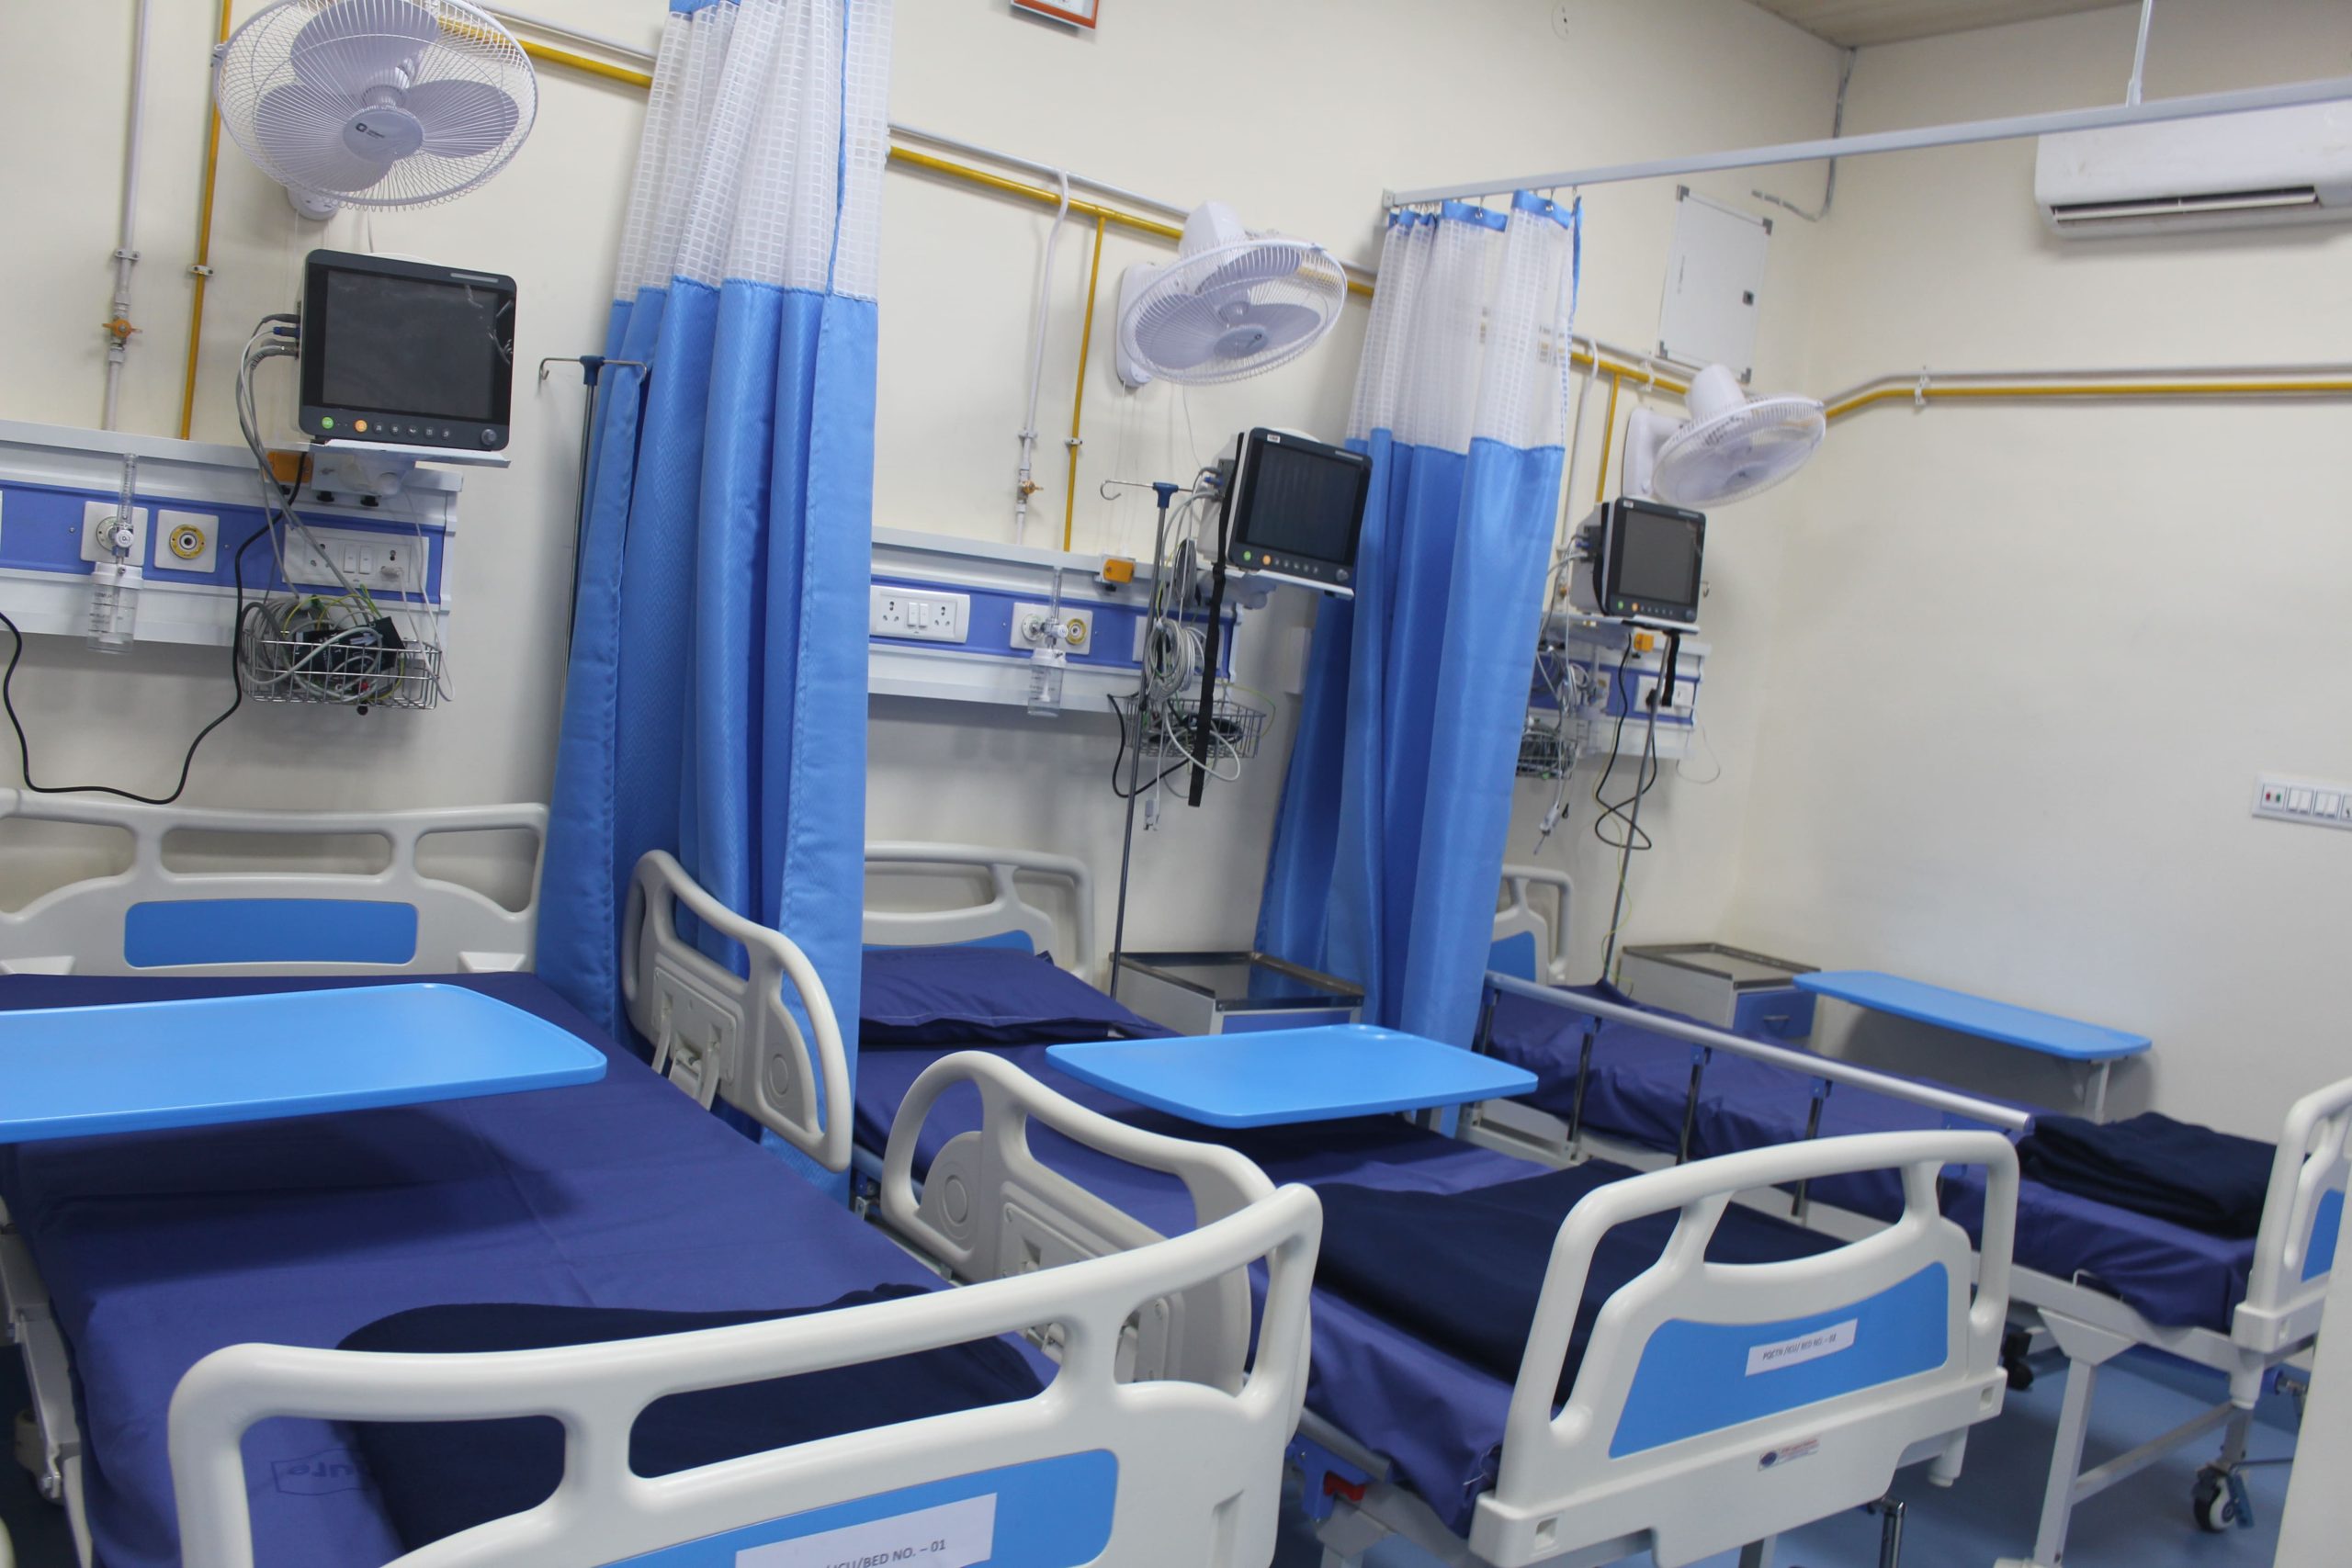 General wards at Chest, Trauma, and Neurology Hospital in Sagar, providing essential care in a comfortable setting for patients.